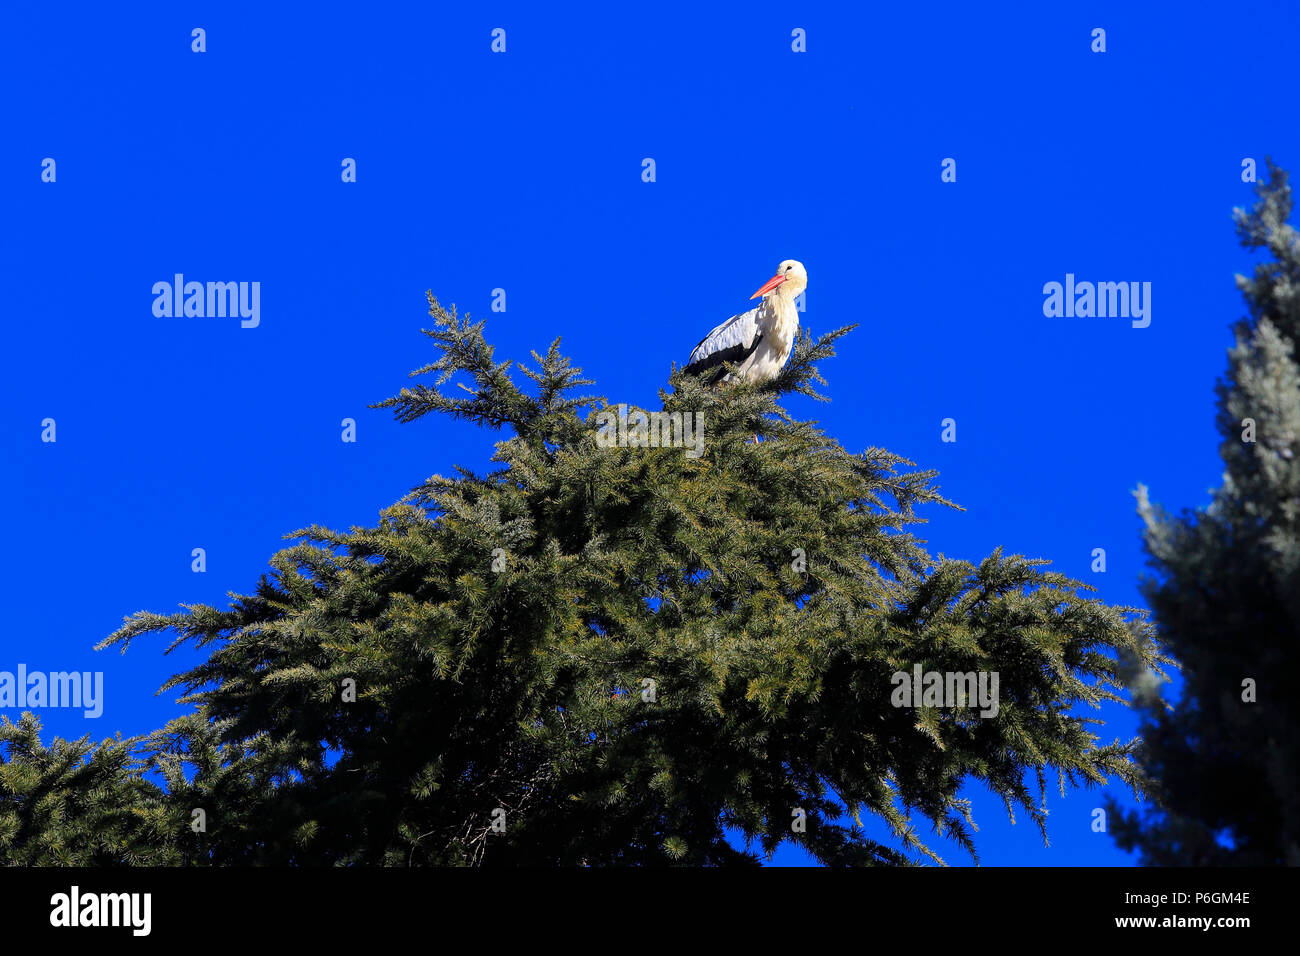 A stork on a tree in downtown Alcala de Henares, a historical and charming city near to Madrid; Alcala de Henares, Spain Stock Photo